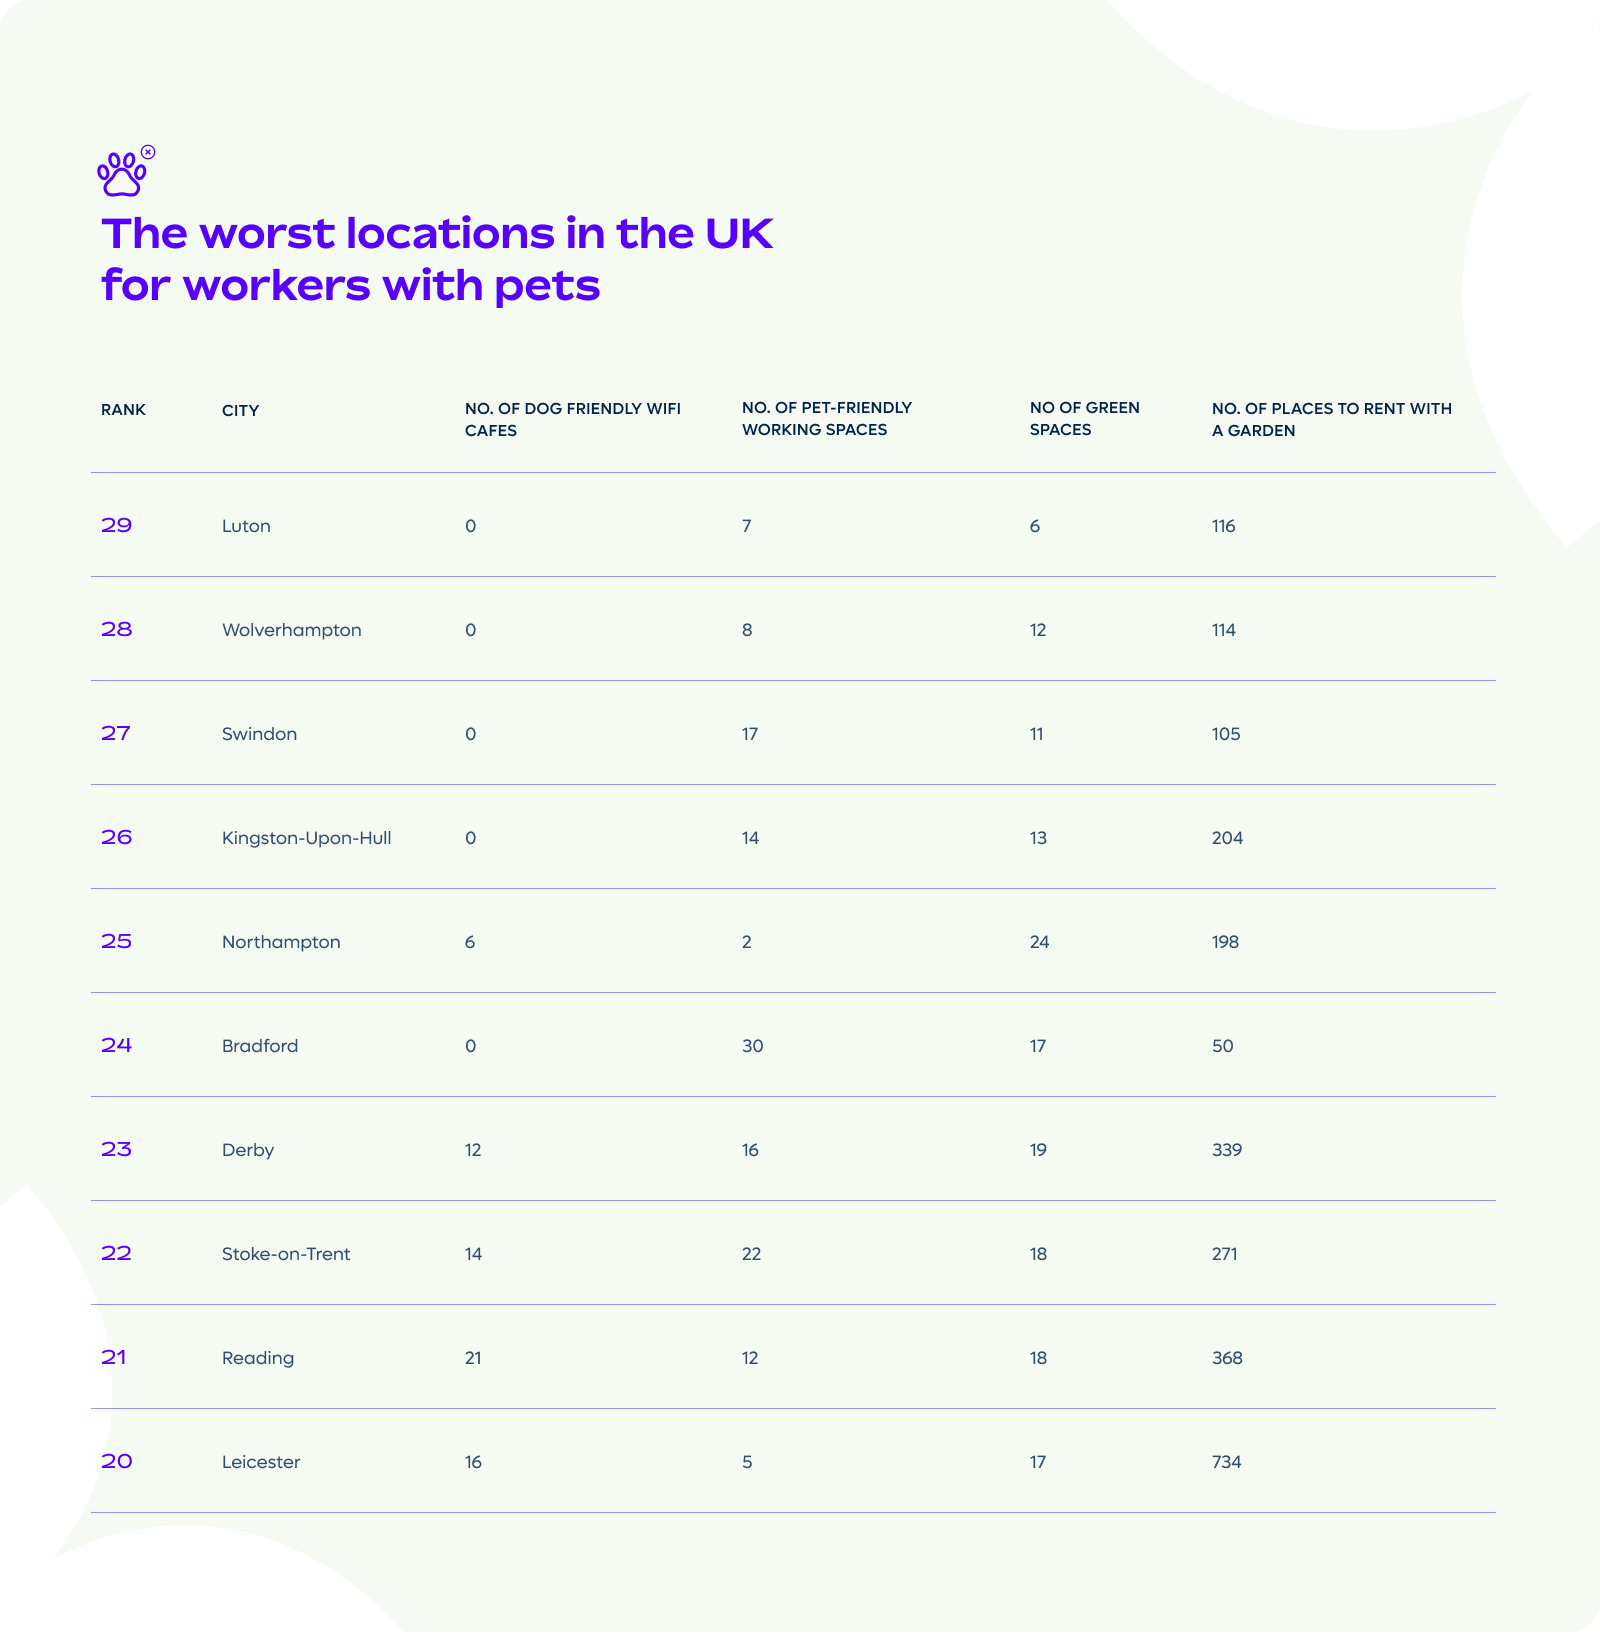 Worst locations in the UK for workers with pets